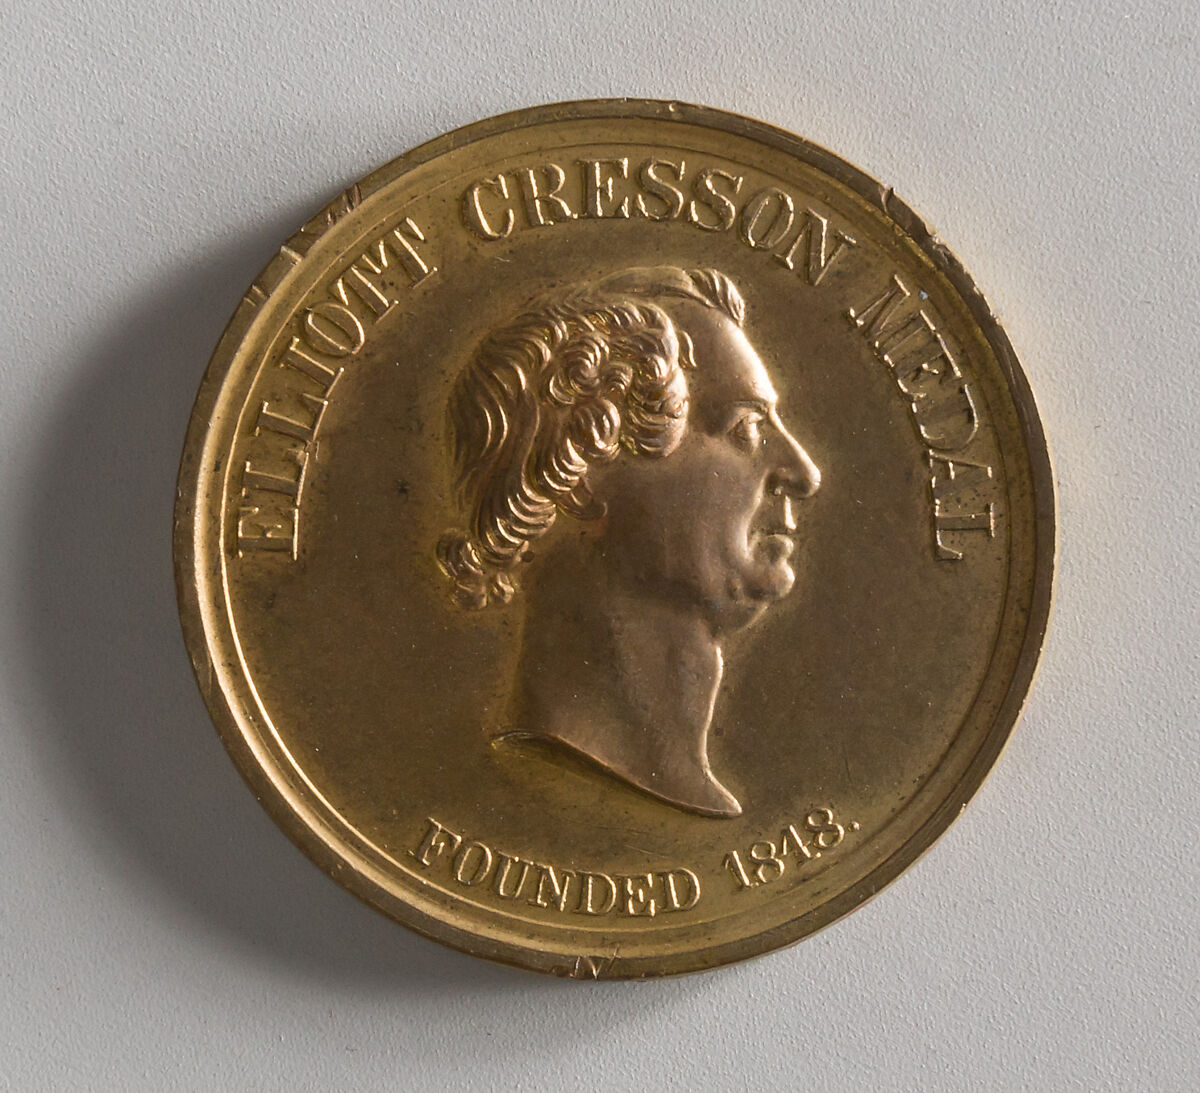 The Elliot Cresson Medal, Bronze and gold leaf, American 